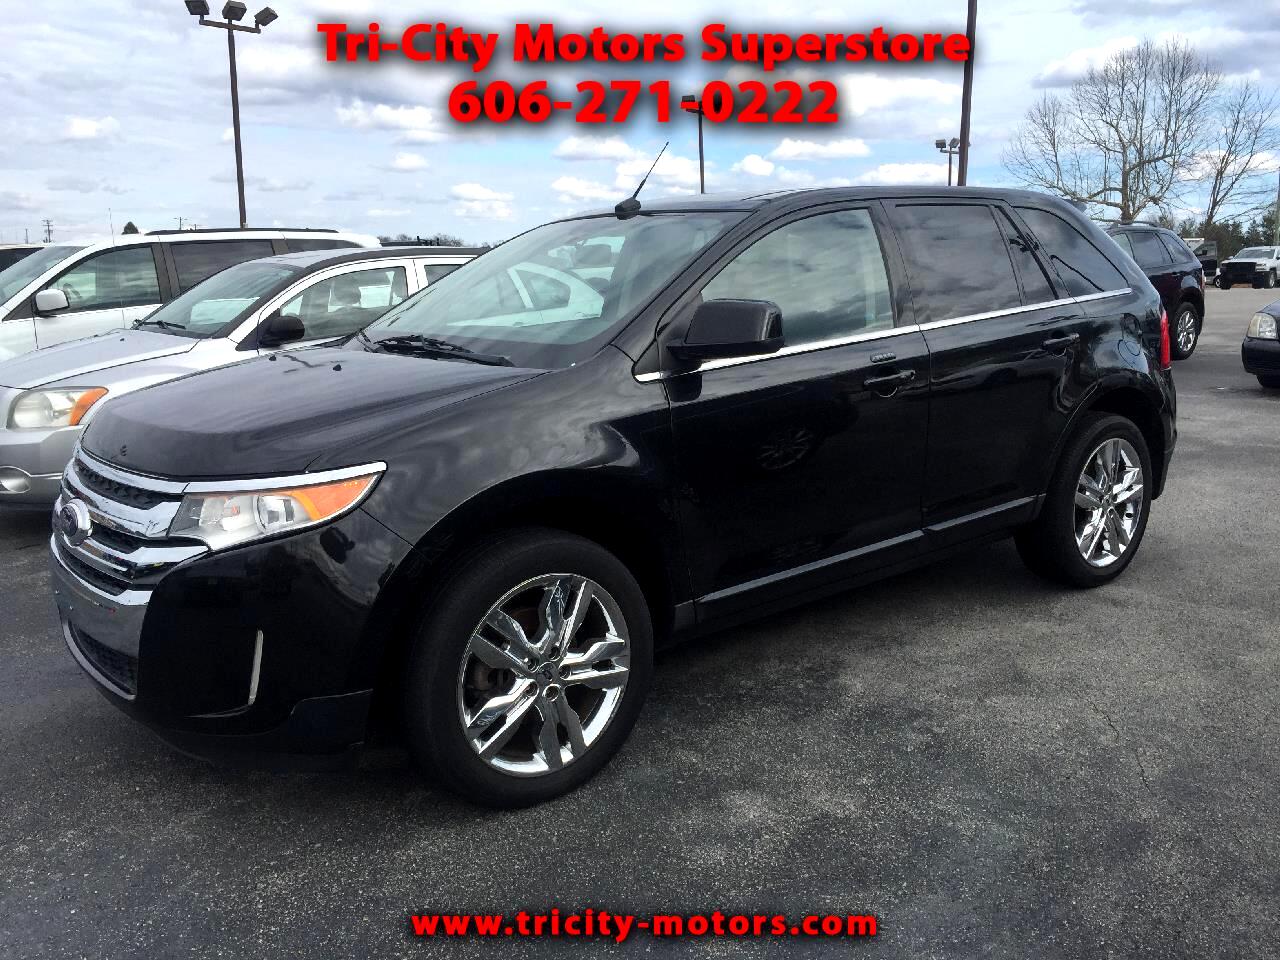 Used 2011 Ford Edge 4dr Limited AWD for Sale in Somerset KY 42501 Tri-City  Motors Superstore